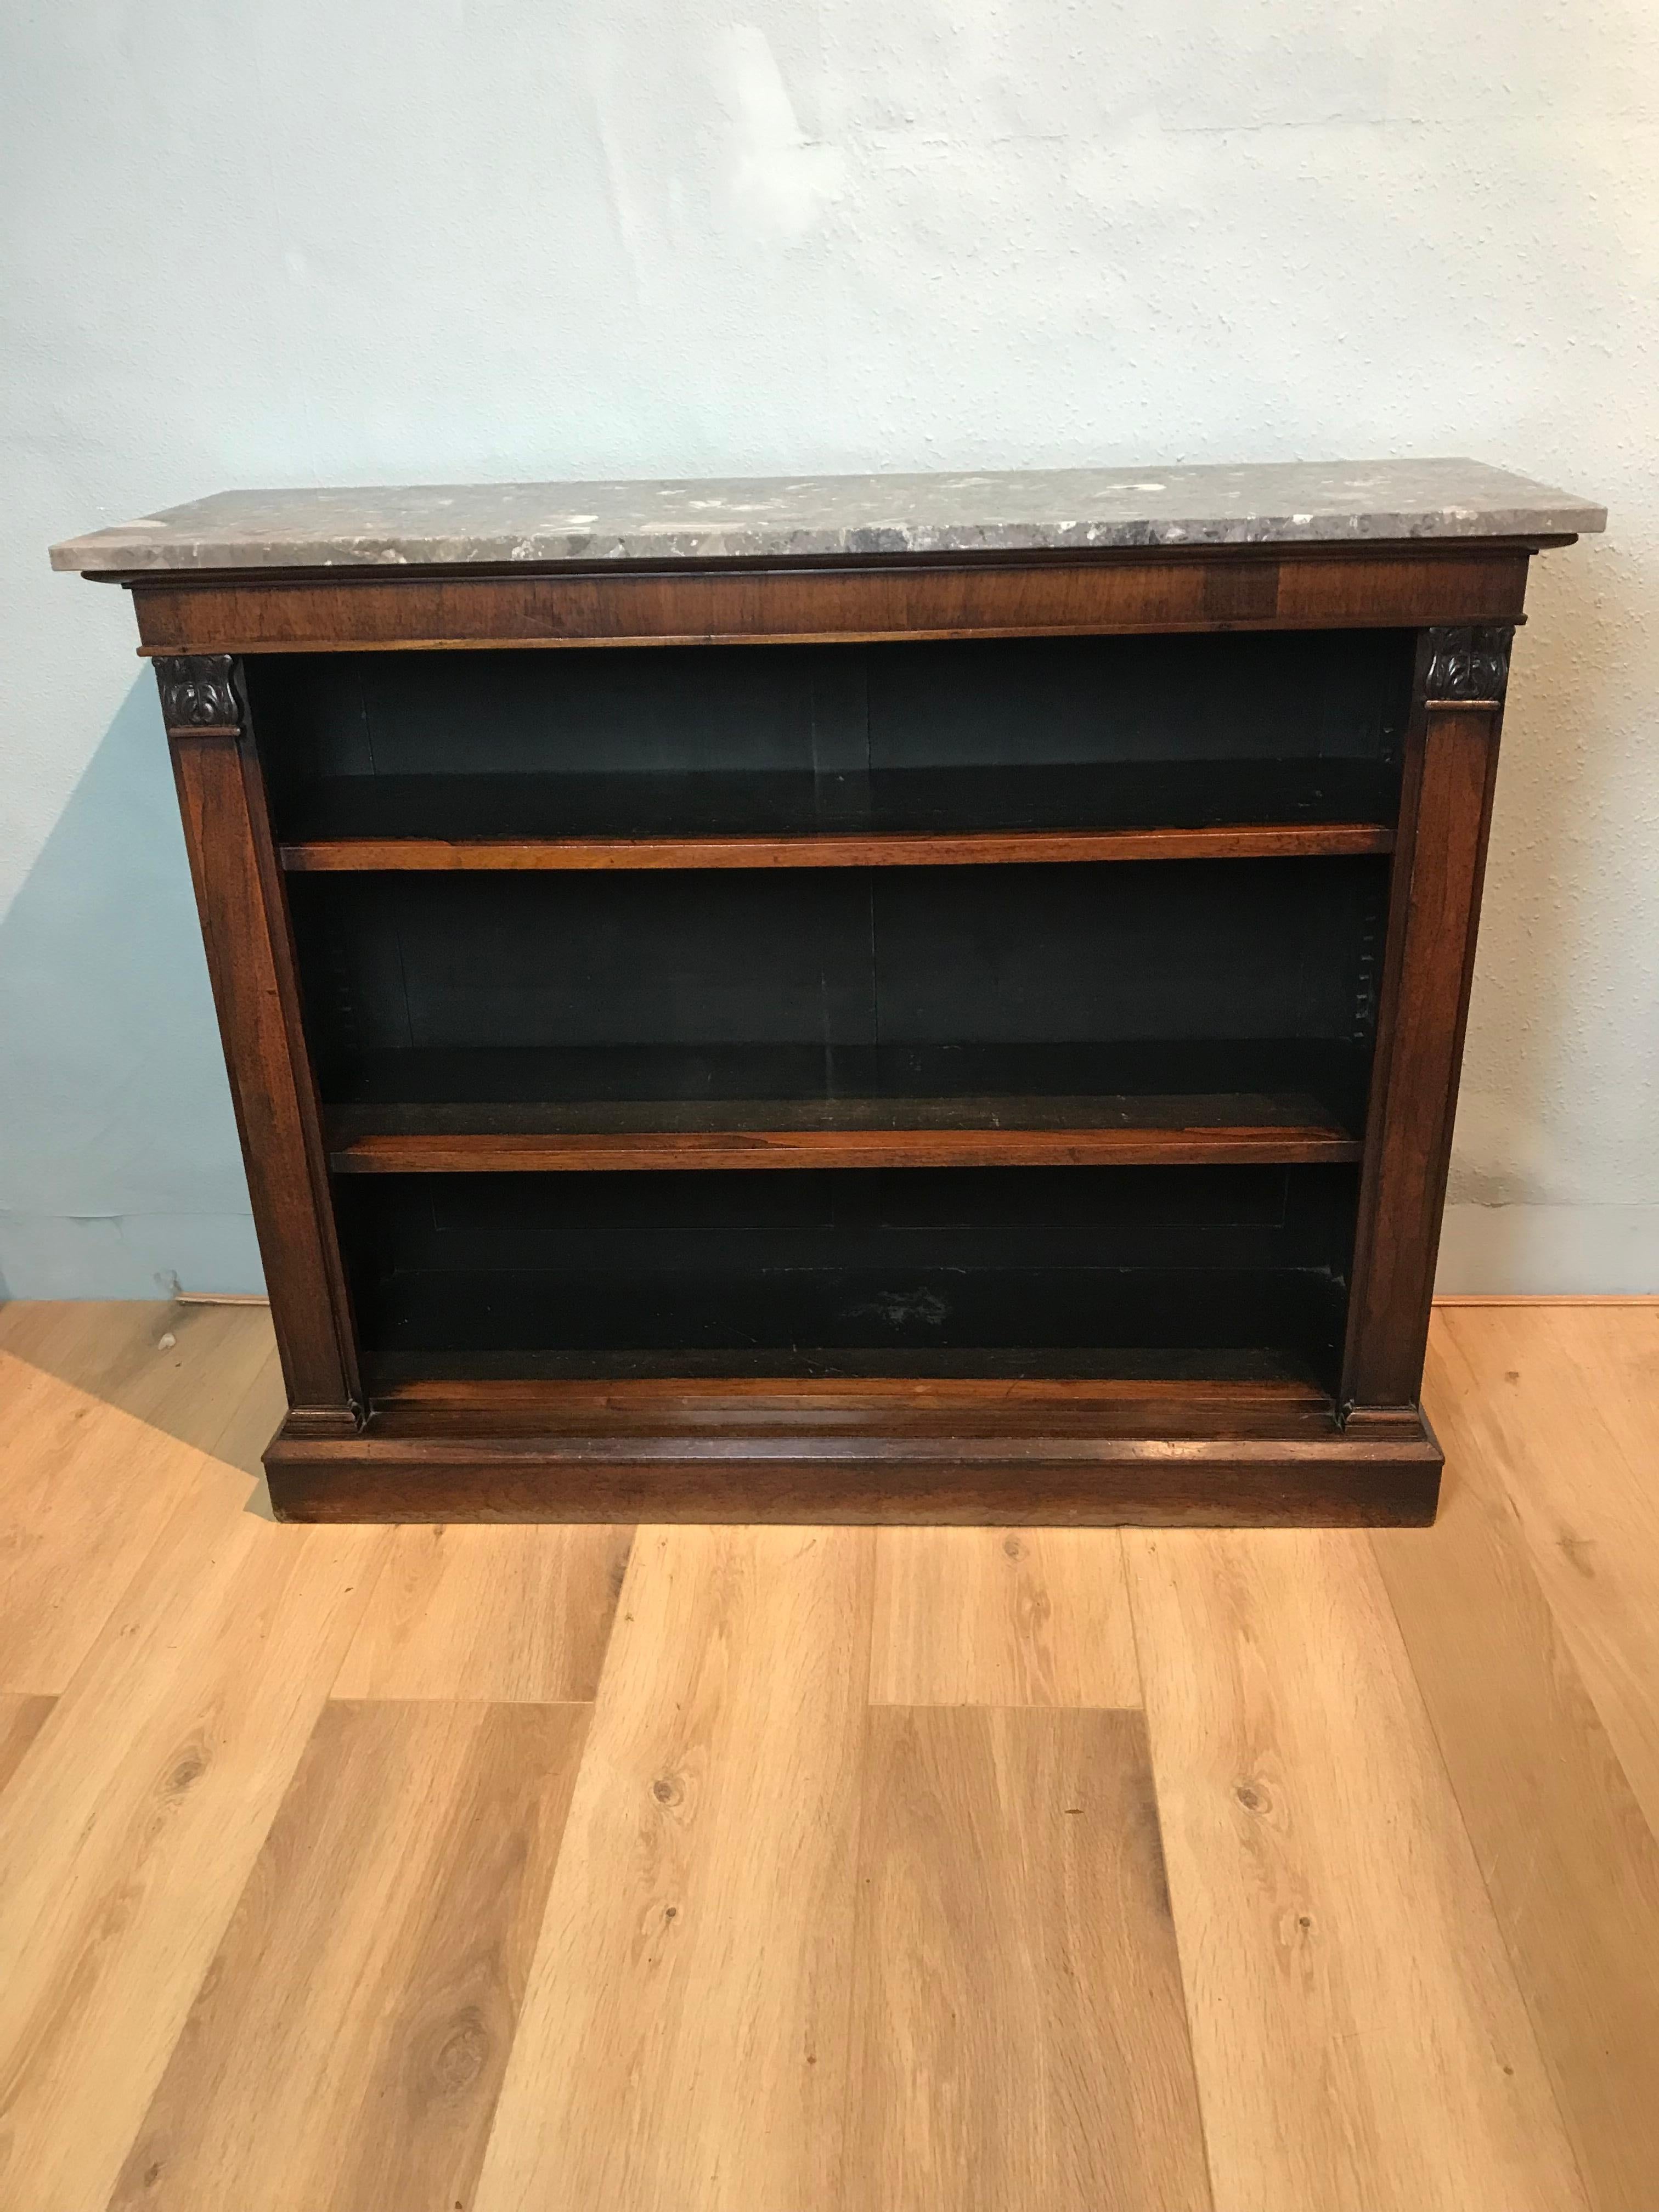 William 4th Freestanding Marble Topped Rosewood Bookcase In Good Condition For Sale In Sherborne, GB